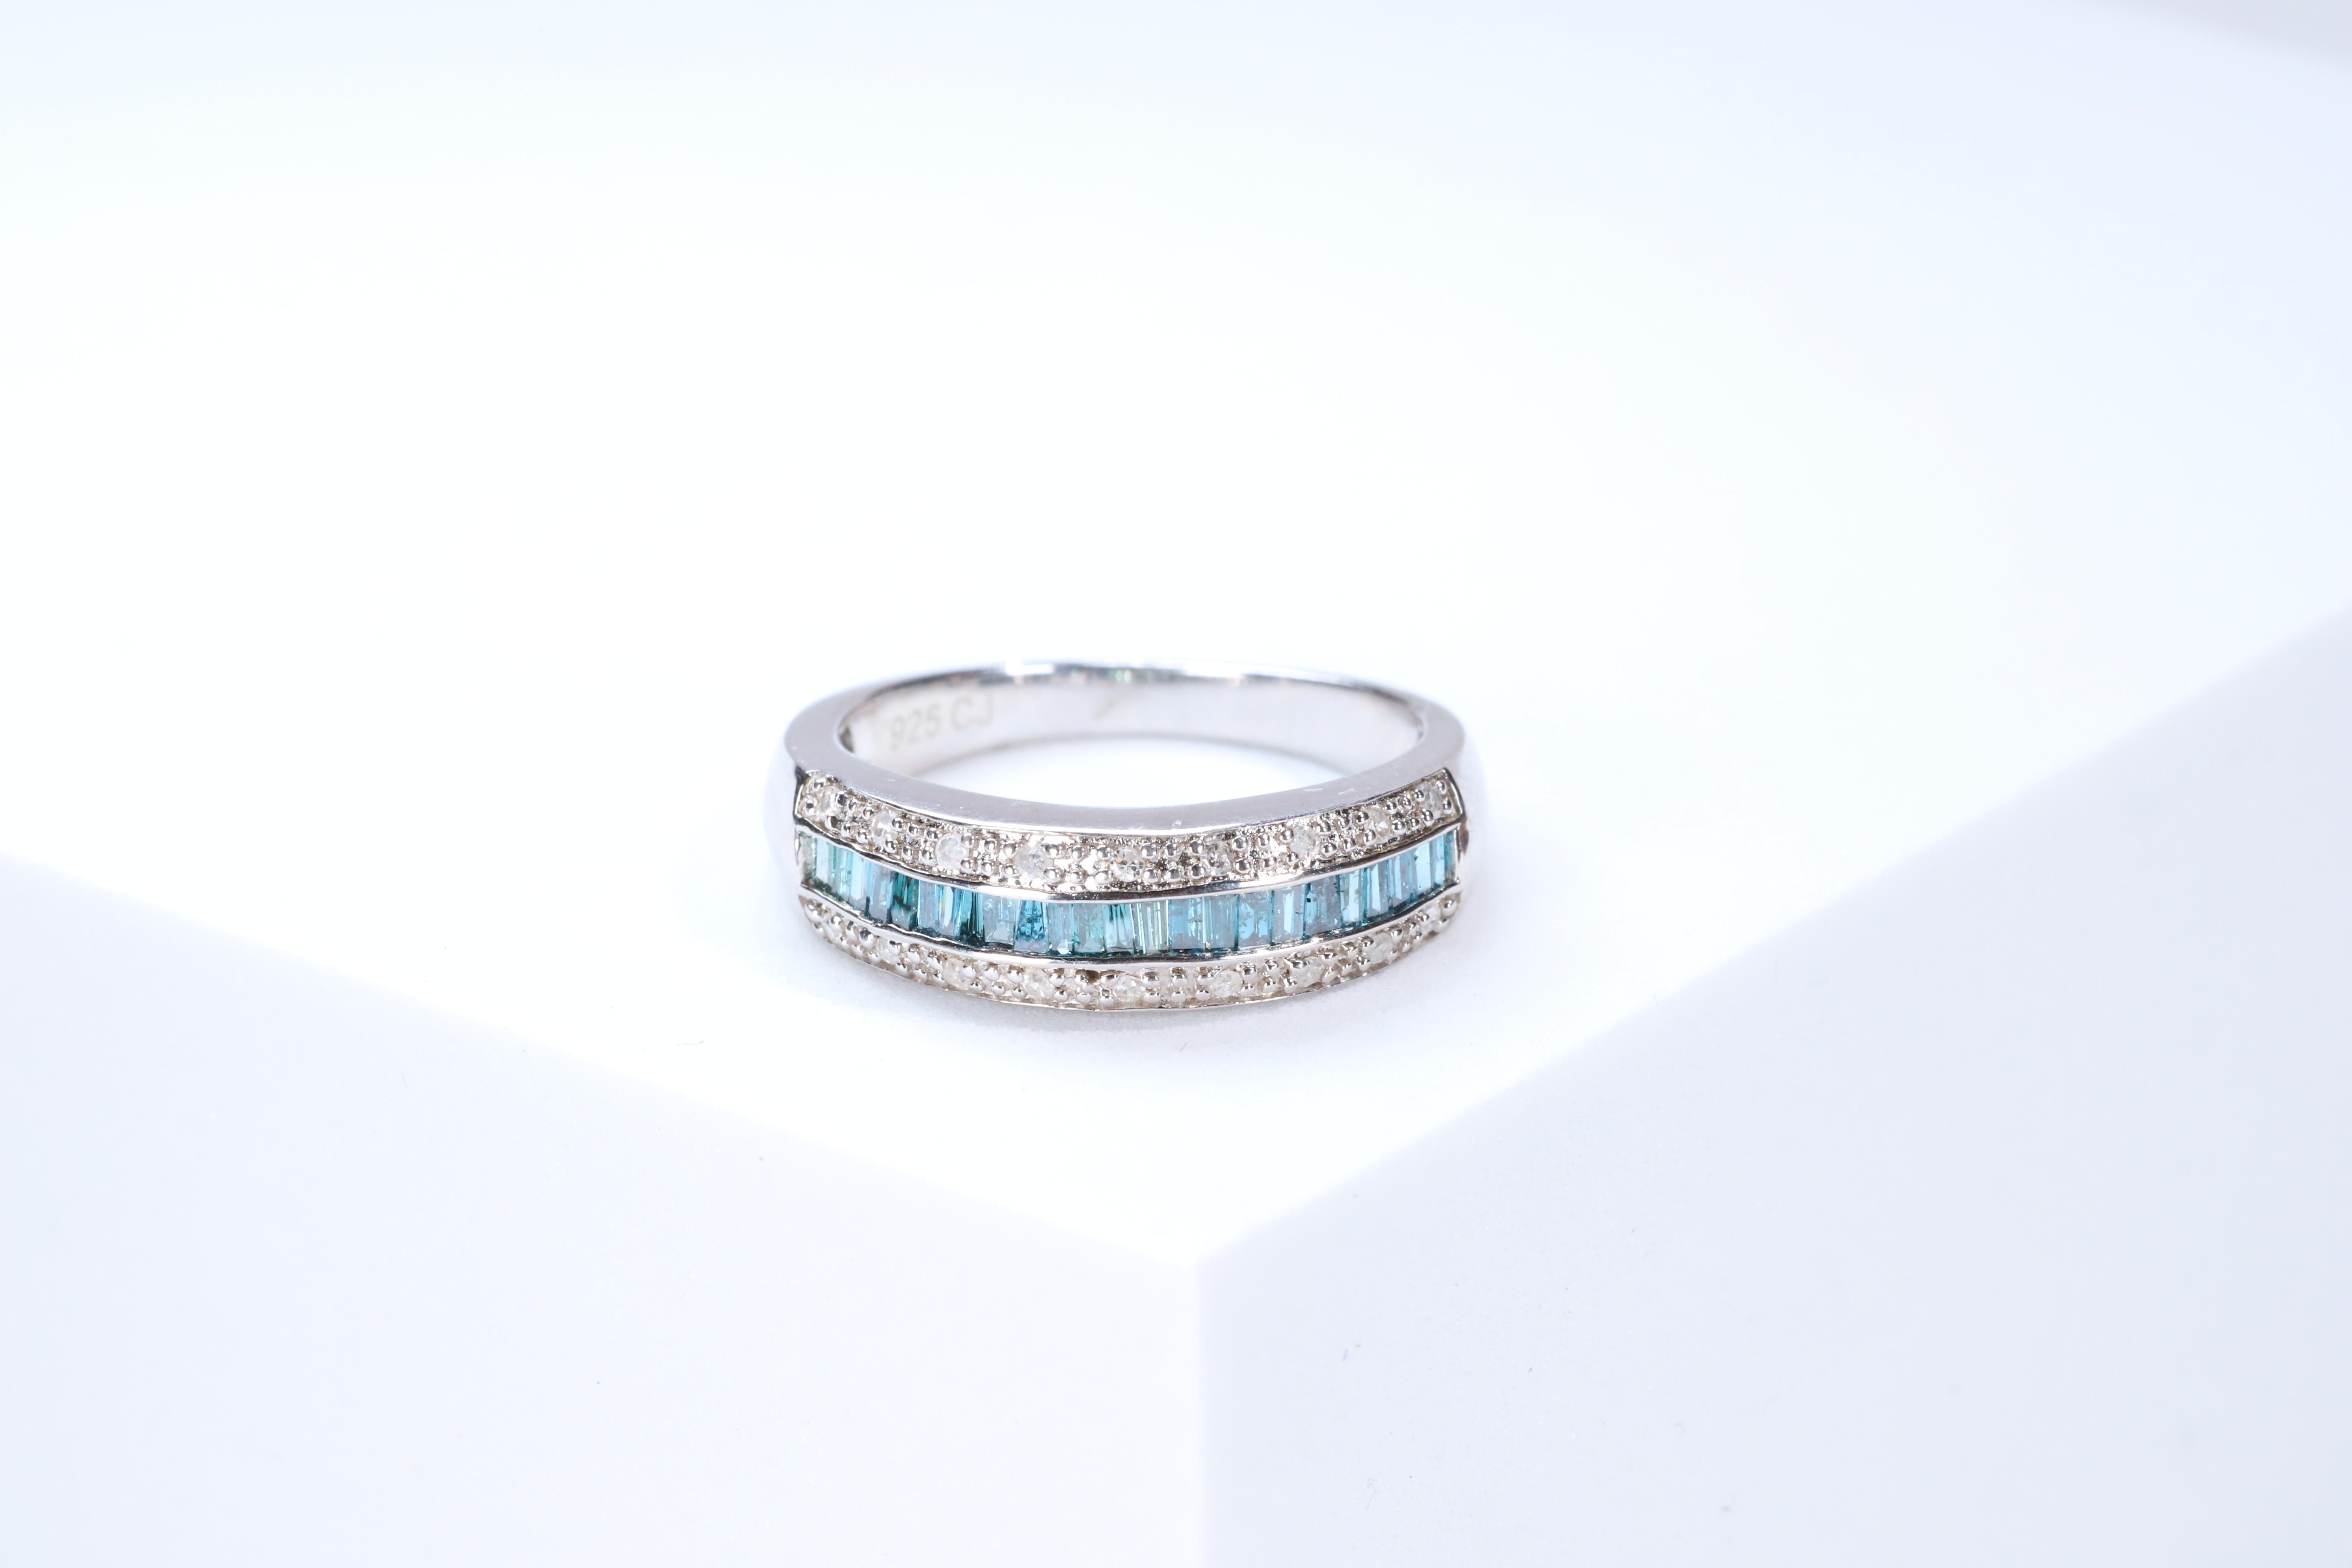 Stunning, timeless and classy eternity Unique Ring. Decorate yourself in luxury with this Gin & Grace Ring. The 925 Sterling Silver jewelry boasts with Natural Round-cut white Diamond (18 Pcs) 0.10 Carat, Baguette-cut Blue Diamond (25 pcs) 0.37